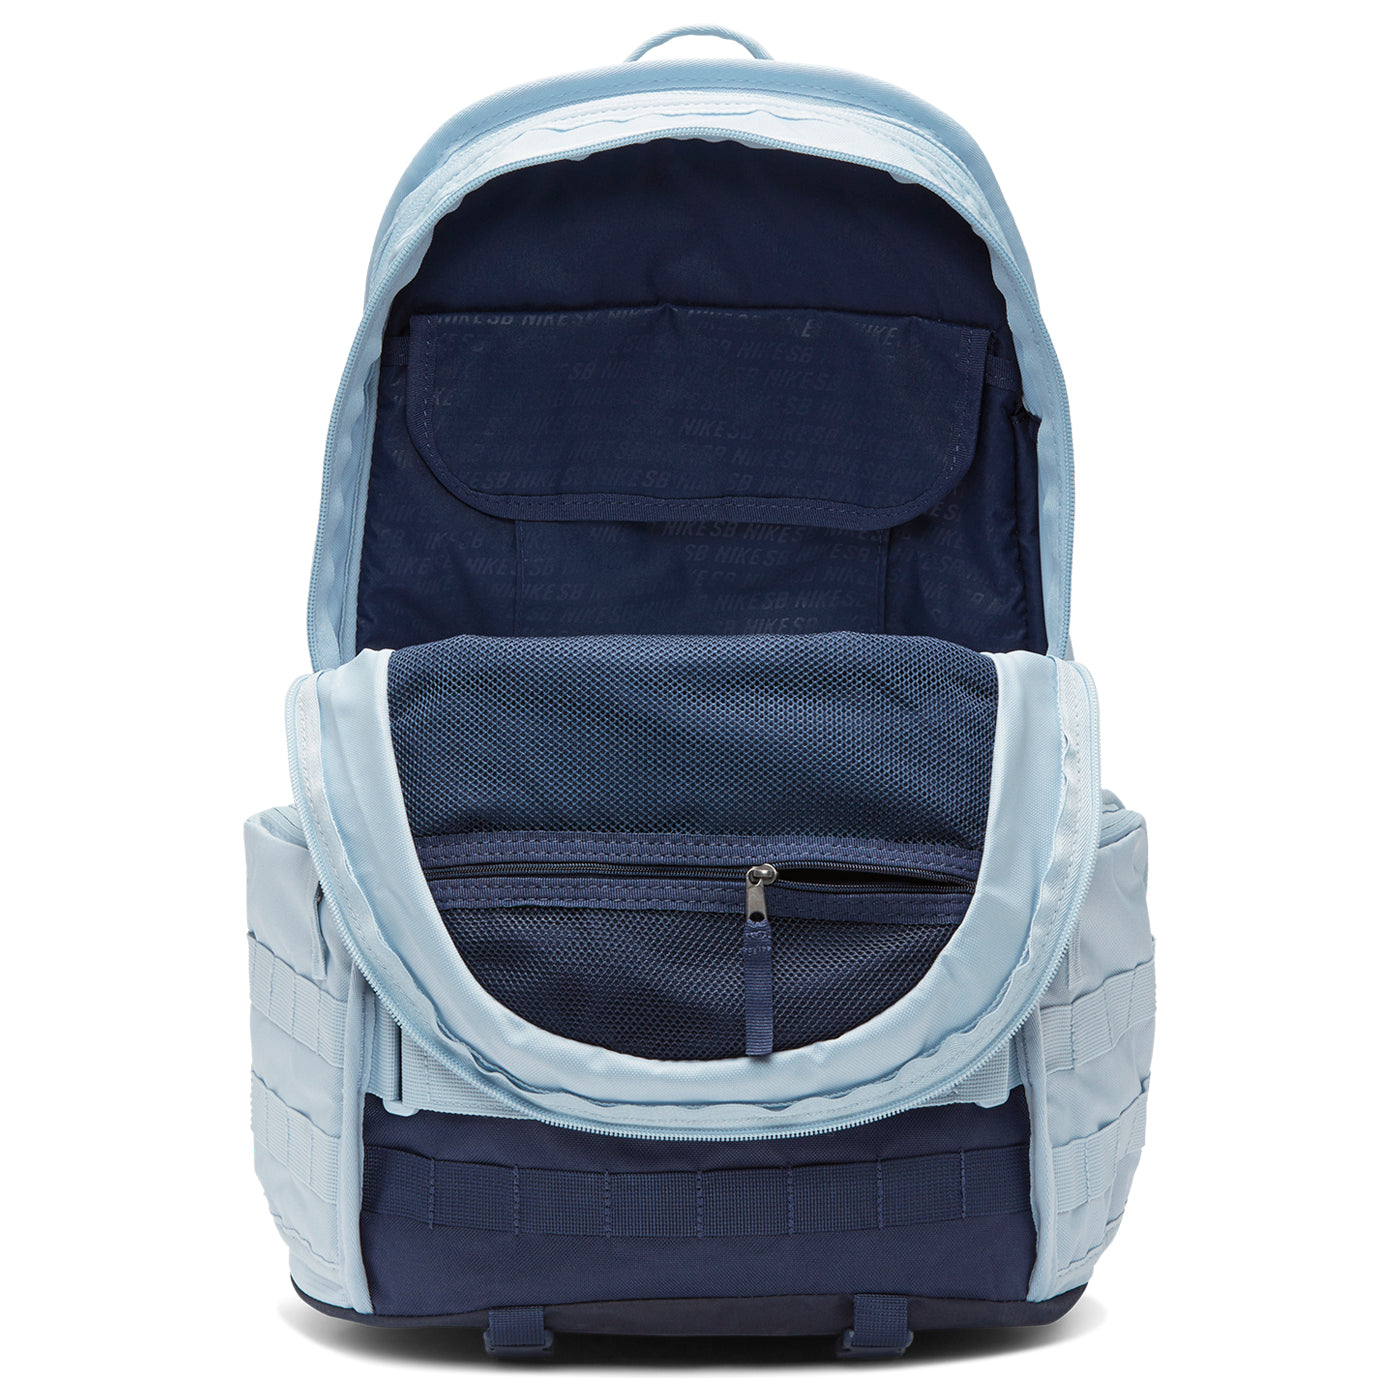 Rpm Backpack In Light Amory Blue Midnight Navy Magic Ember By Nike Sb Bored Of Southsea